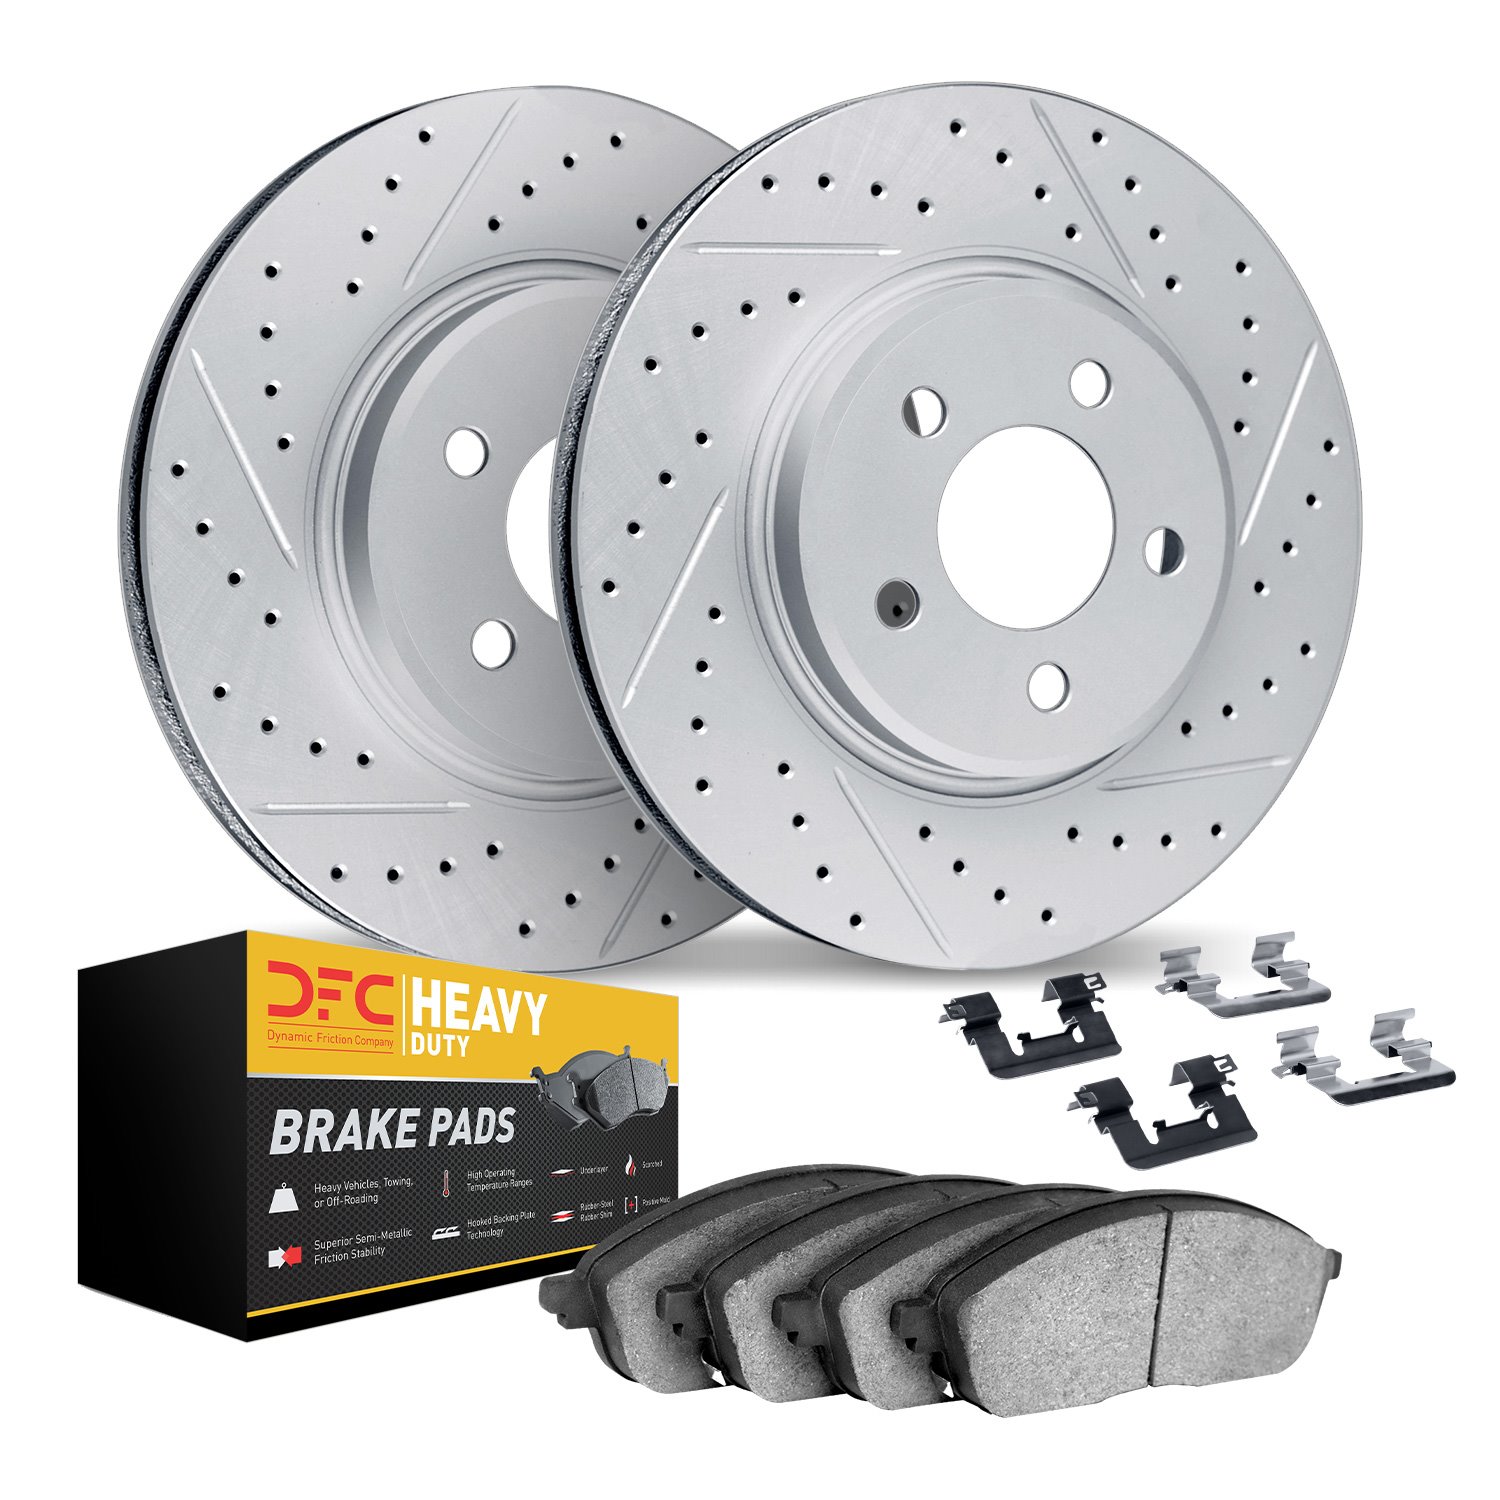 2212-99124 Geoperformance Drilled/Slotted Rotors w/Heavy-Duty Pads Kit & Hardware, 1997-2002 Ford/Lincoln/Mercury/Mazda, Positio